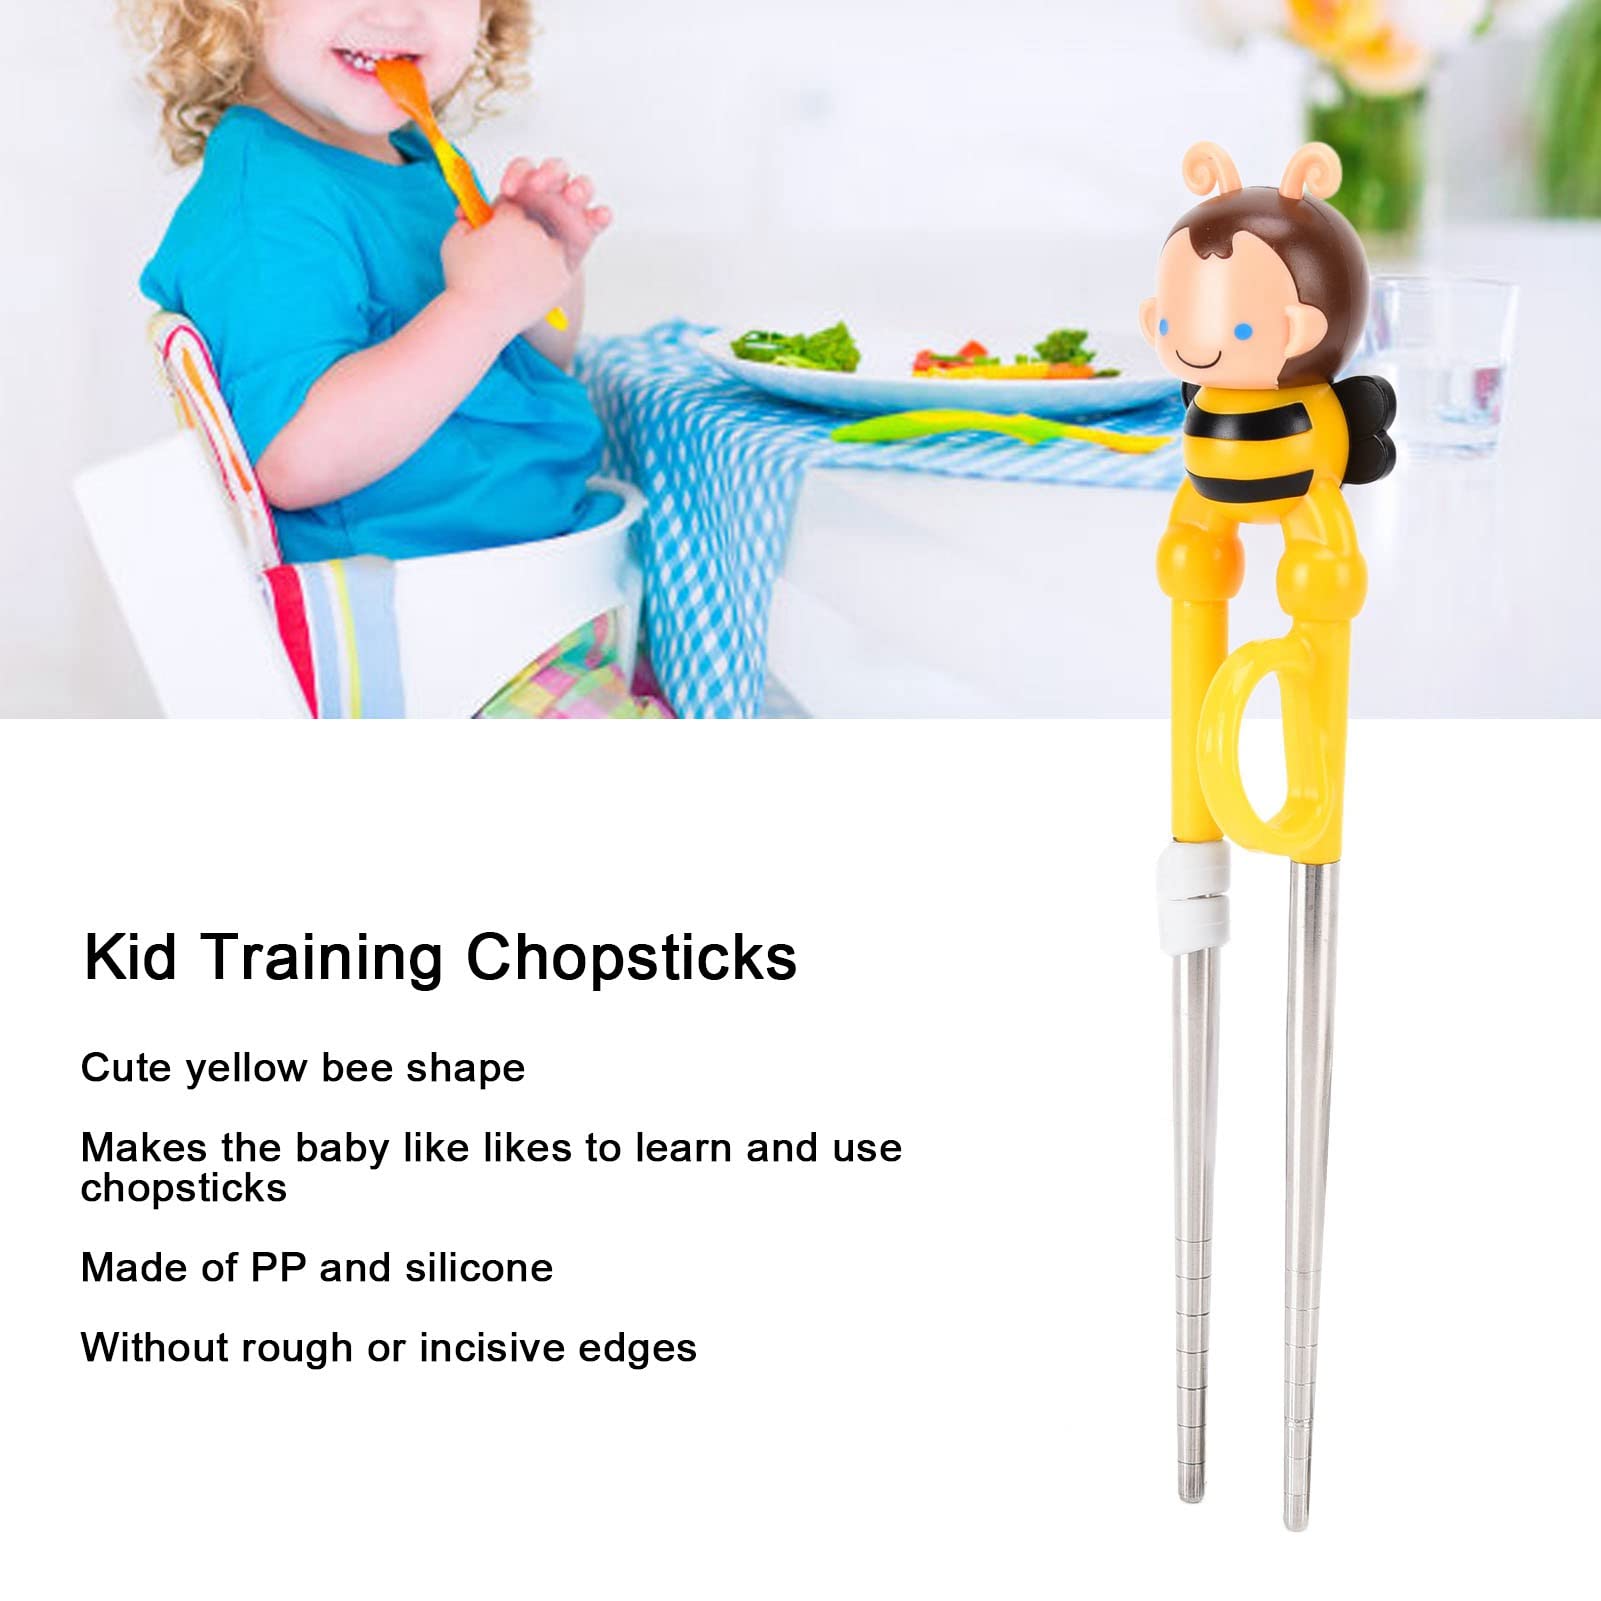 Children's Practice Chopsticks, Cute Yellow Bee Soft PP Silicone Training Chopsticks Dishwasher Safe Develop Fine Motor Skills for Right Hand Use(Bee-stainless steel yellow)